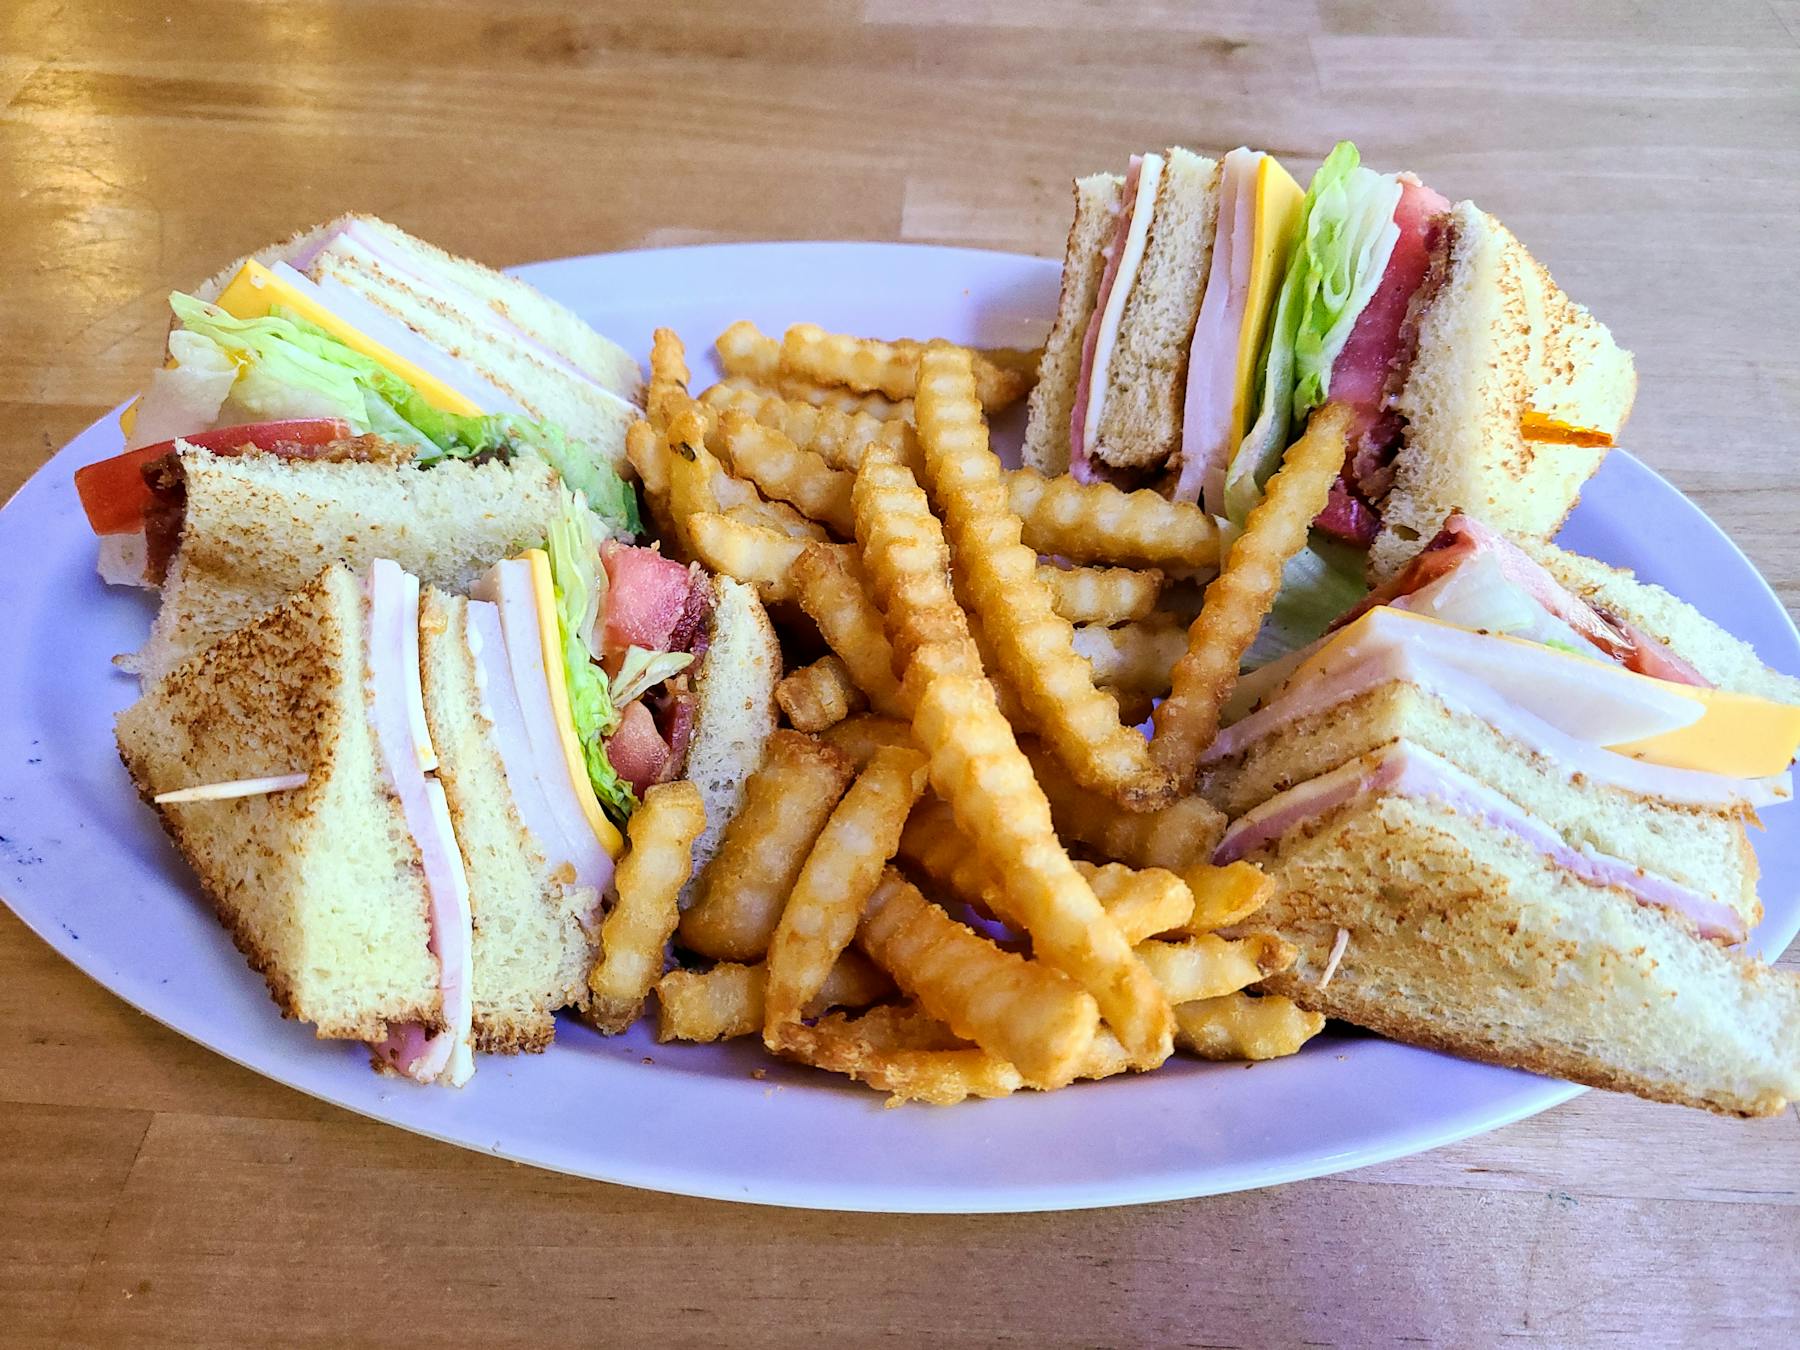 a sandwich and fries on a plate